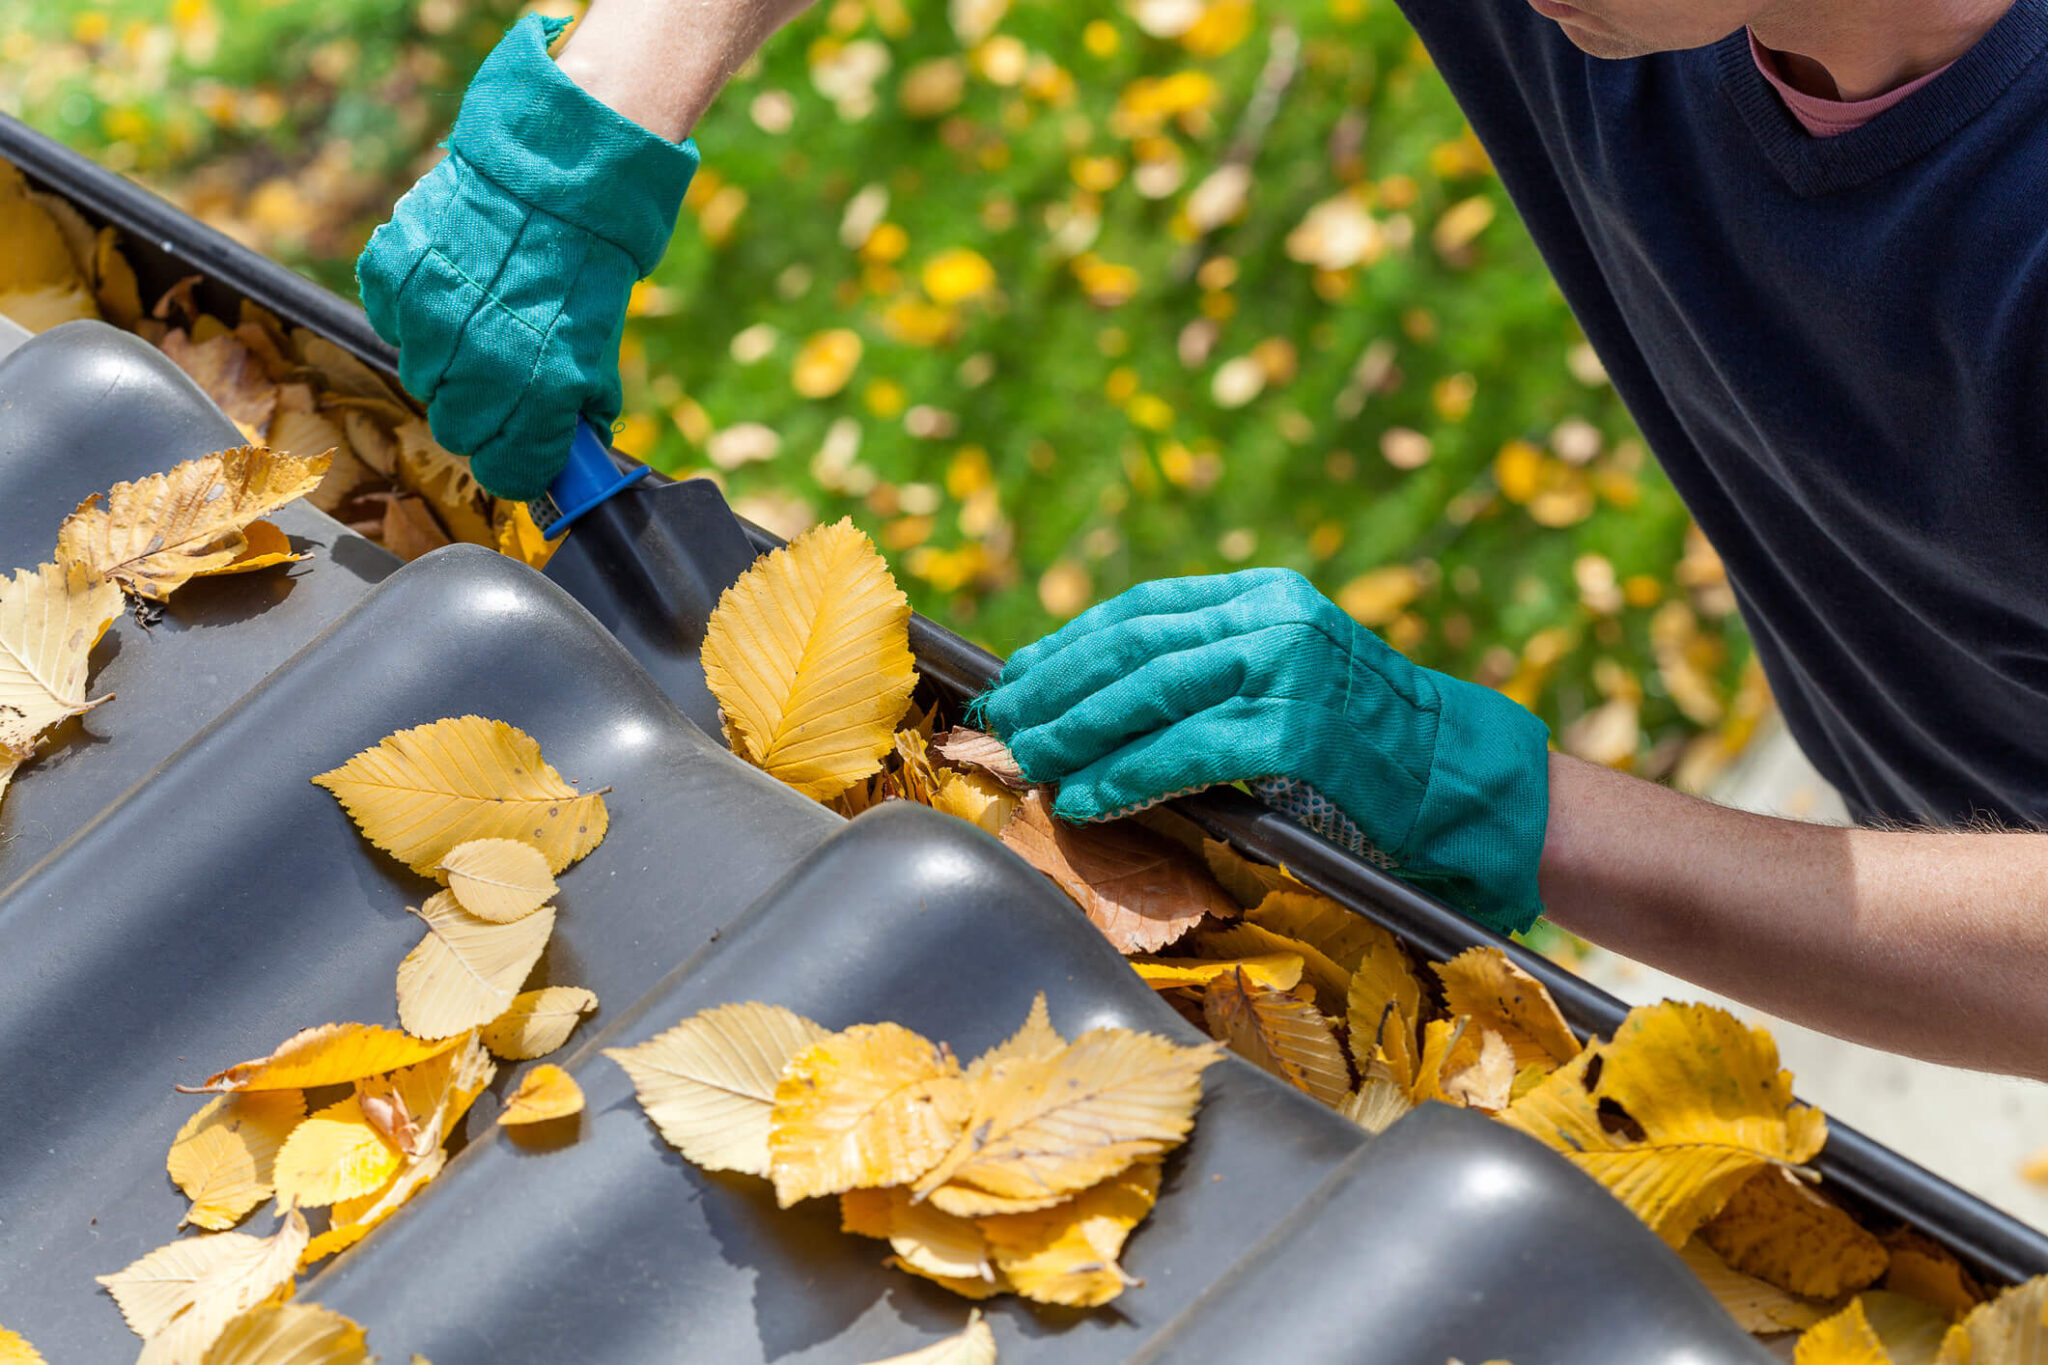 A man in green gloves cleaning a gutter full of leaves.